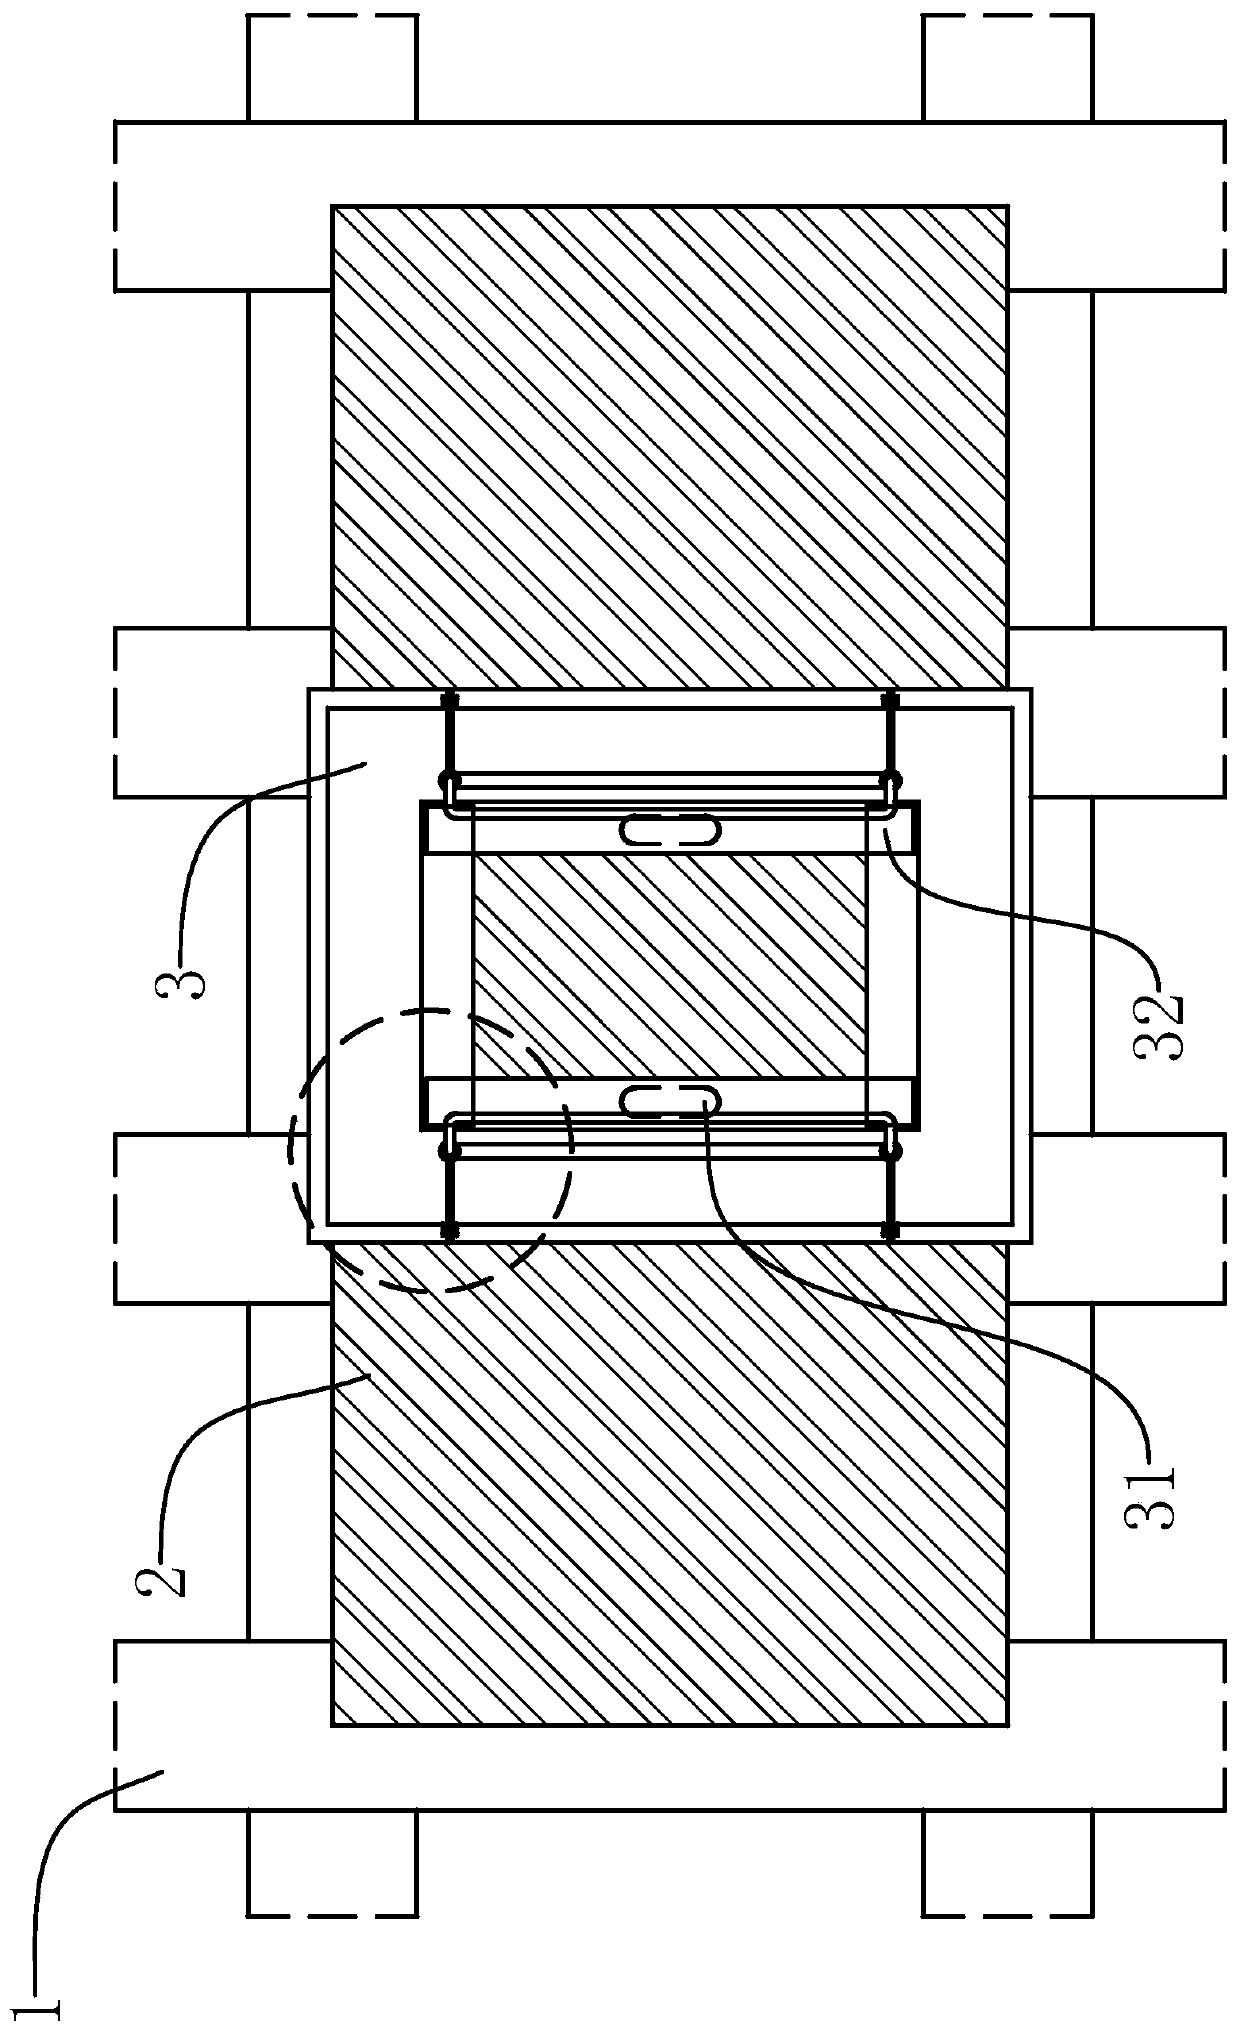 Safe and quick dismounting tool and panel dismounting method